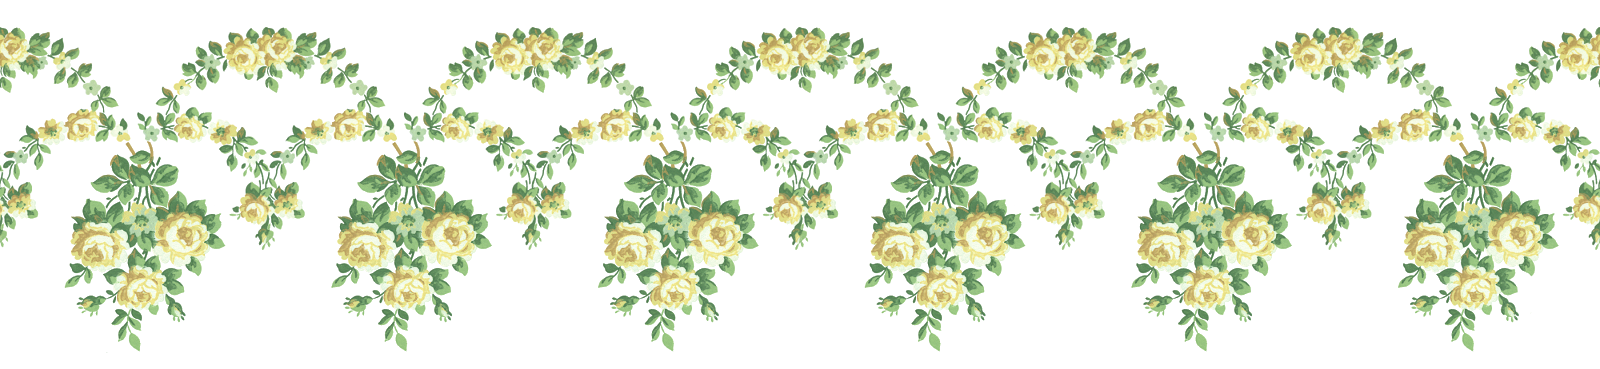 rose-yellow-border-download-flower-swag-